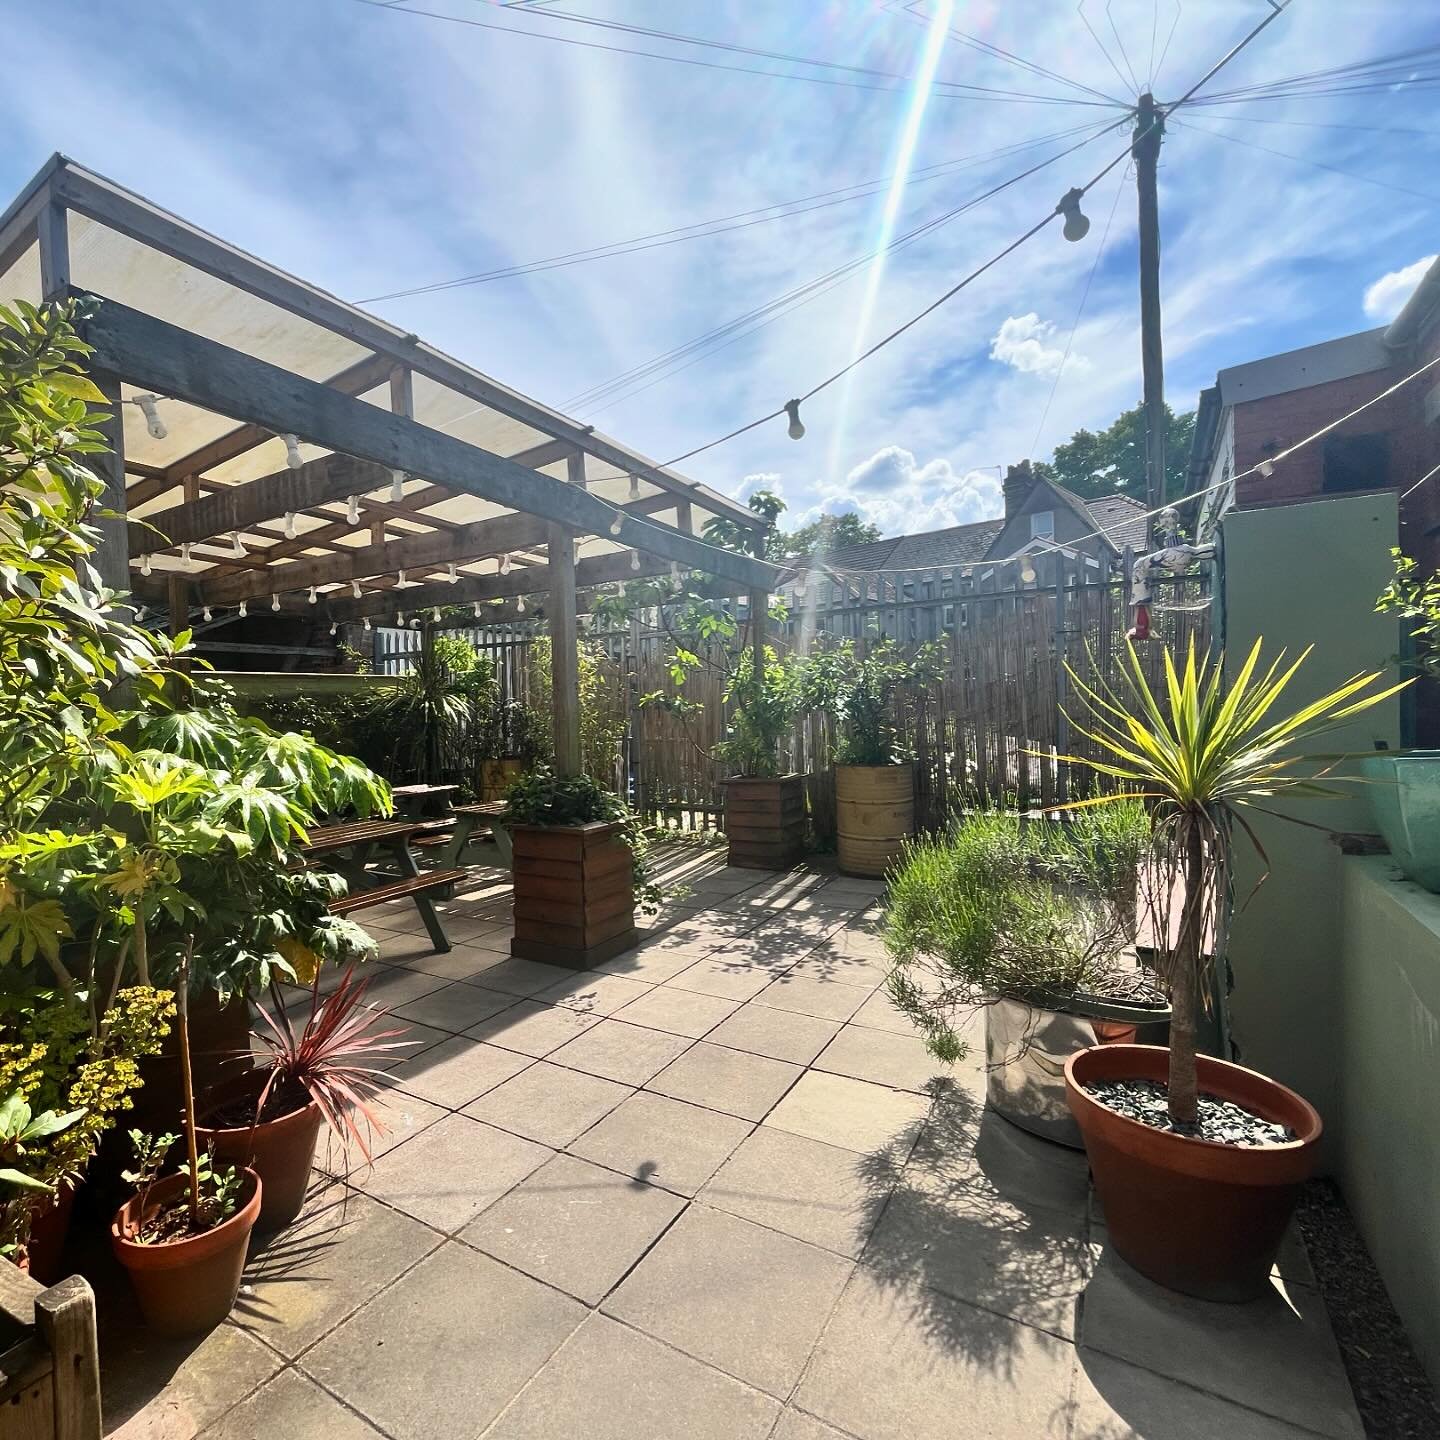 The perfect beer garden in Cardiff doesn&rsquo;t exis&hellip;

Our south facing sun-trap garden is open all afternoon and evenings on weekends and catches the rays across all hours 🌞🌿 We now have the music from inside the bar shared outside via spe